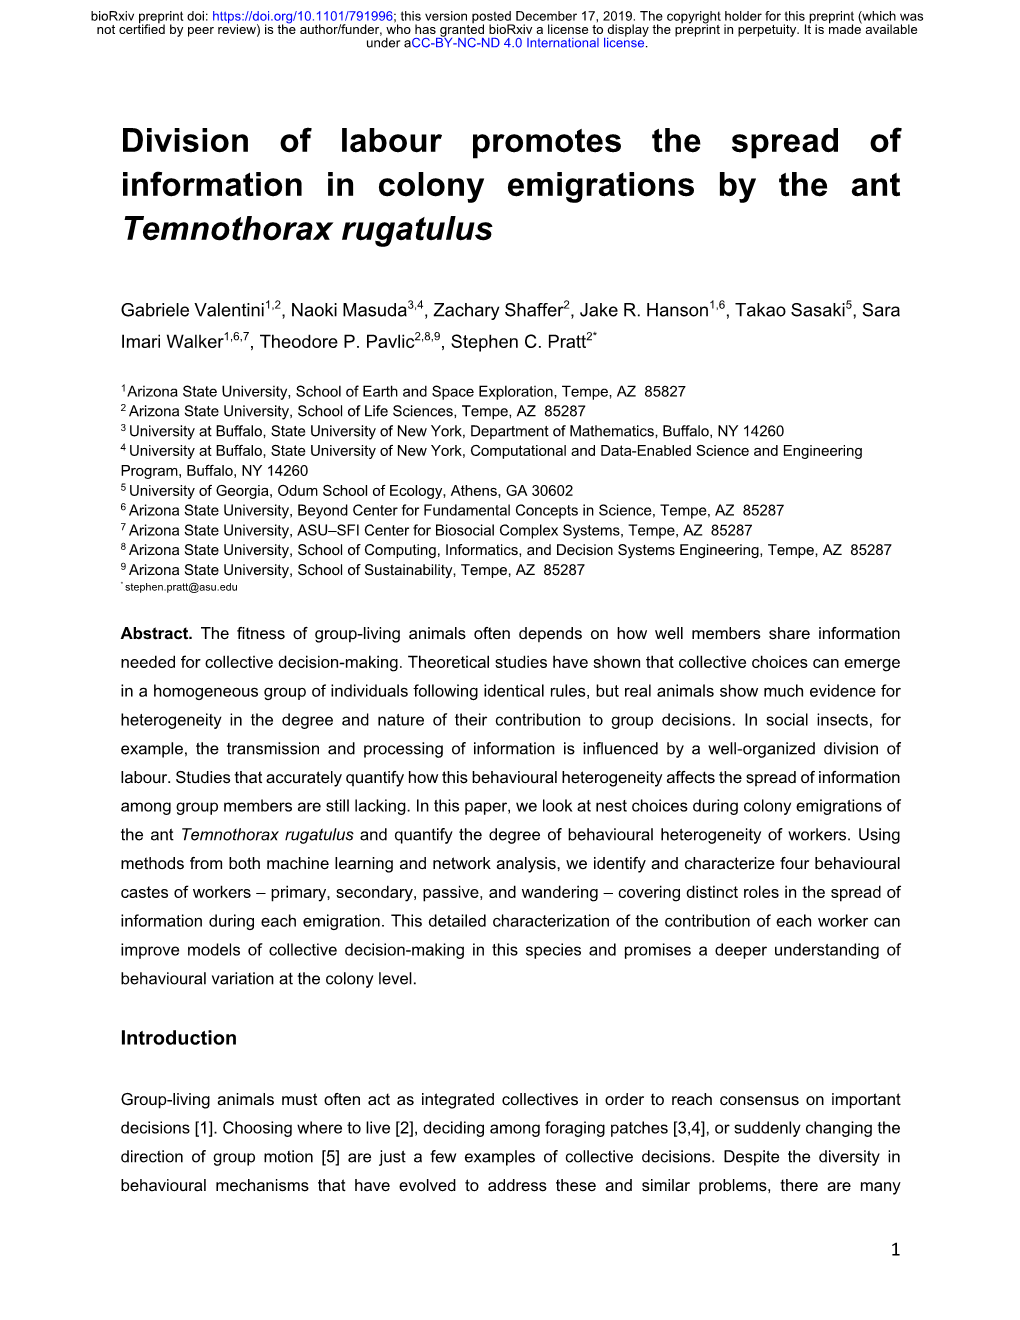 Division of Labour Promotes the Spread of Information in Colony Emigrations by the Ant Temnothorax Rugatulus